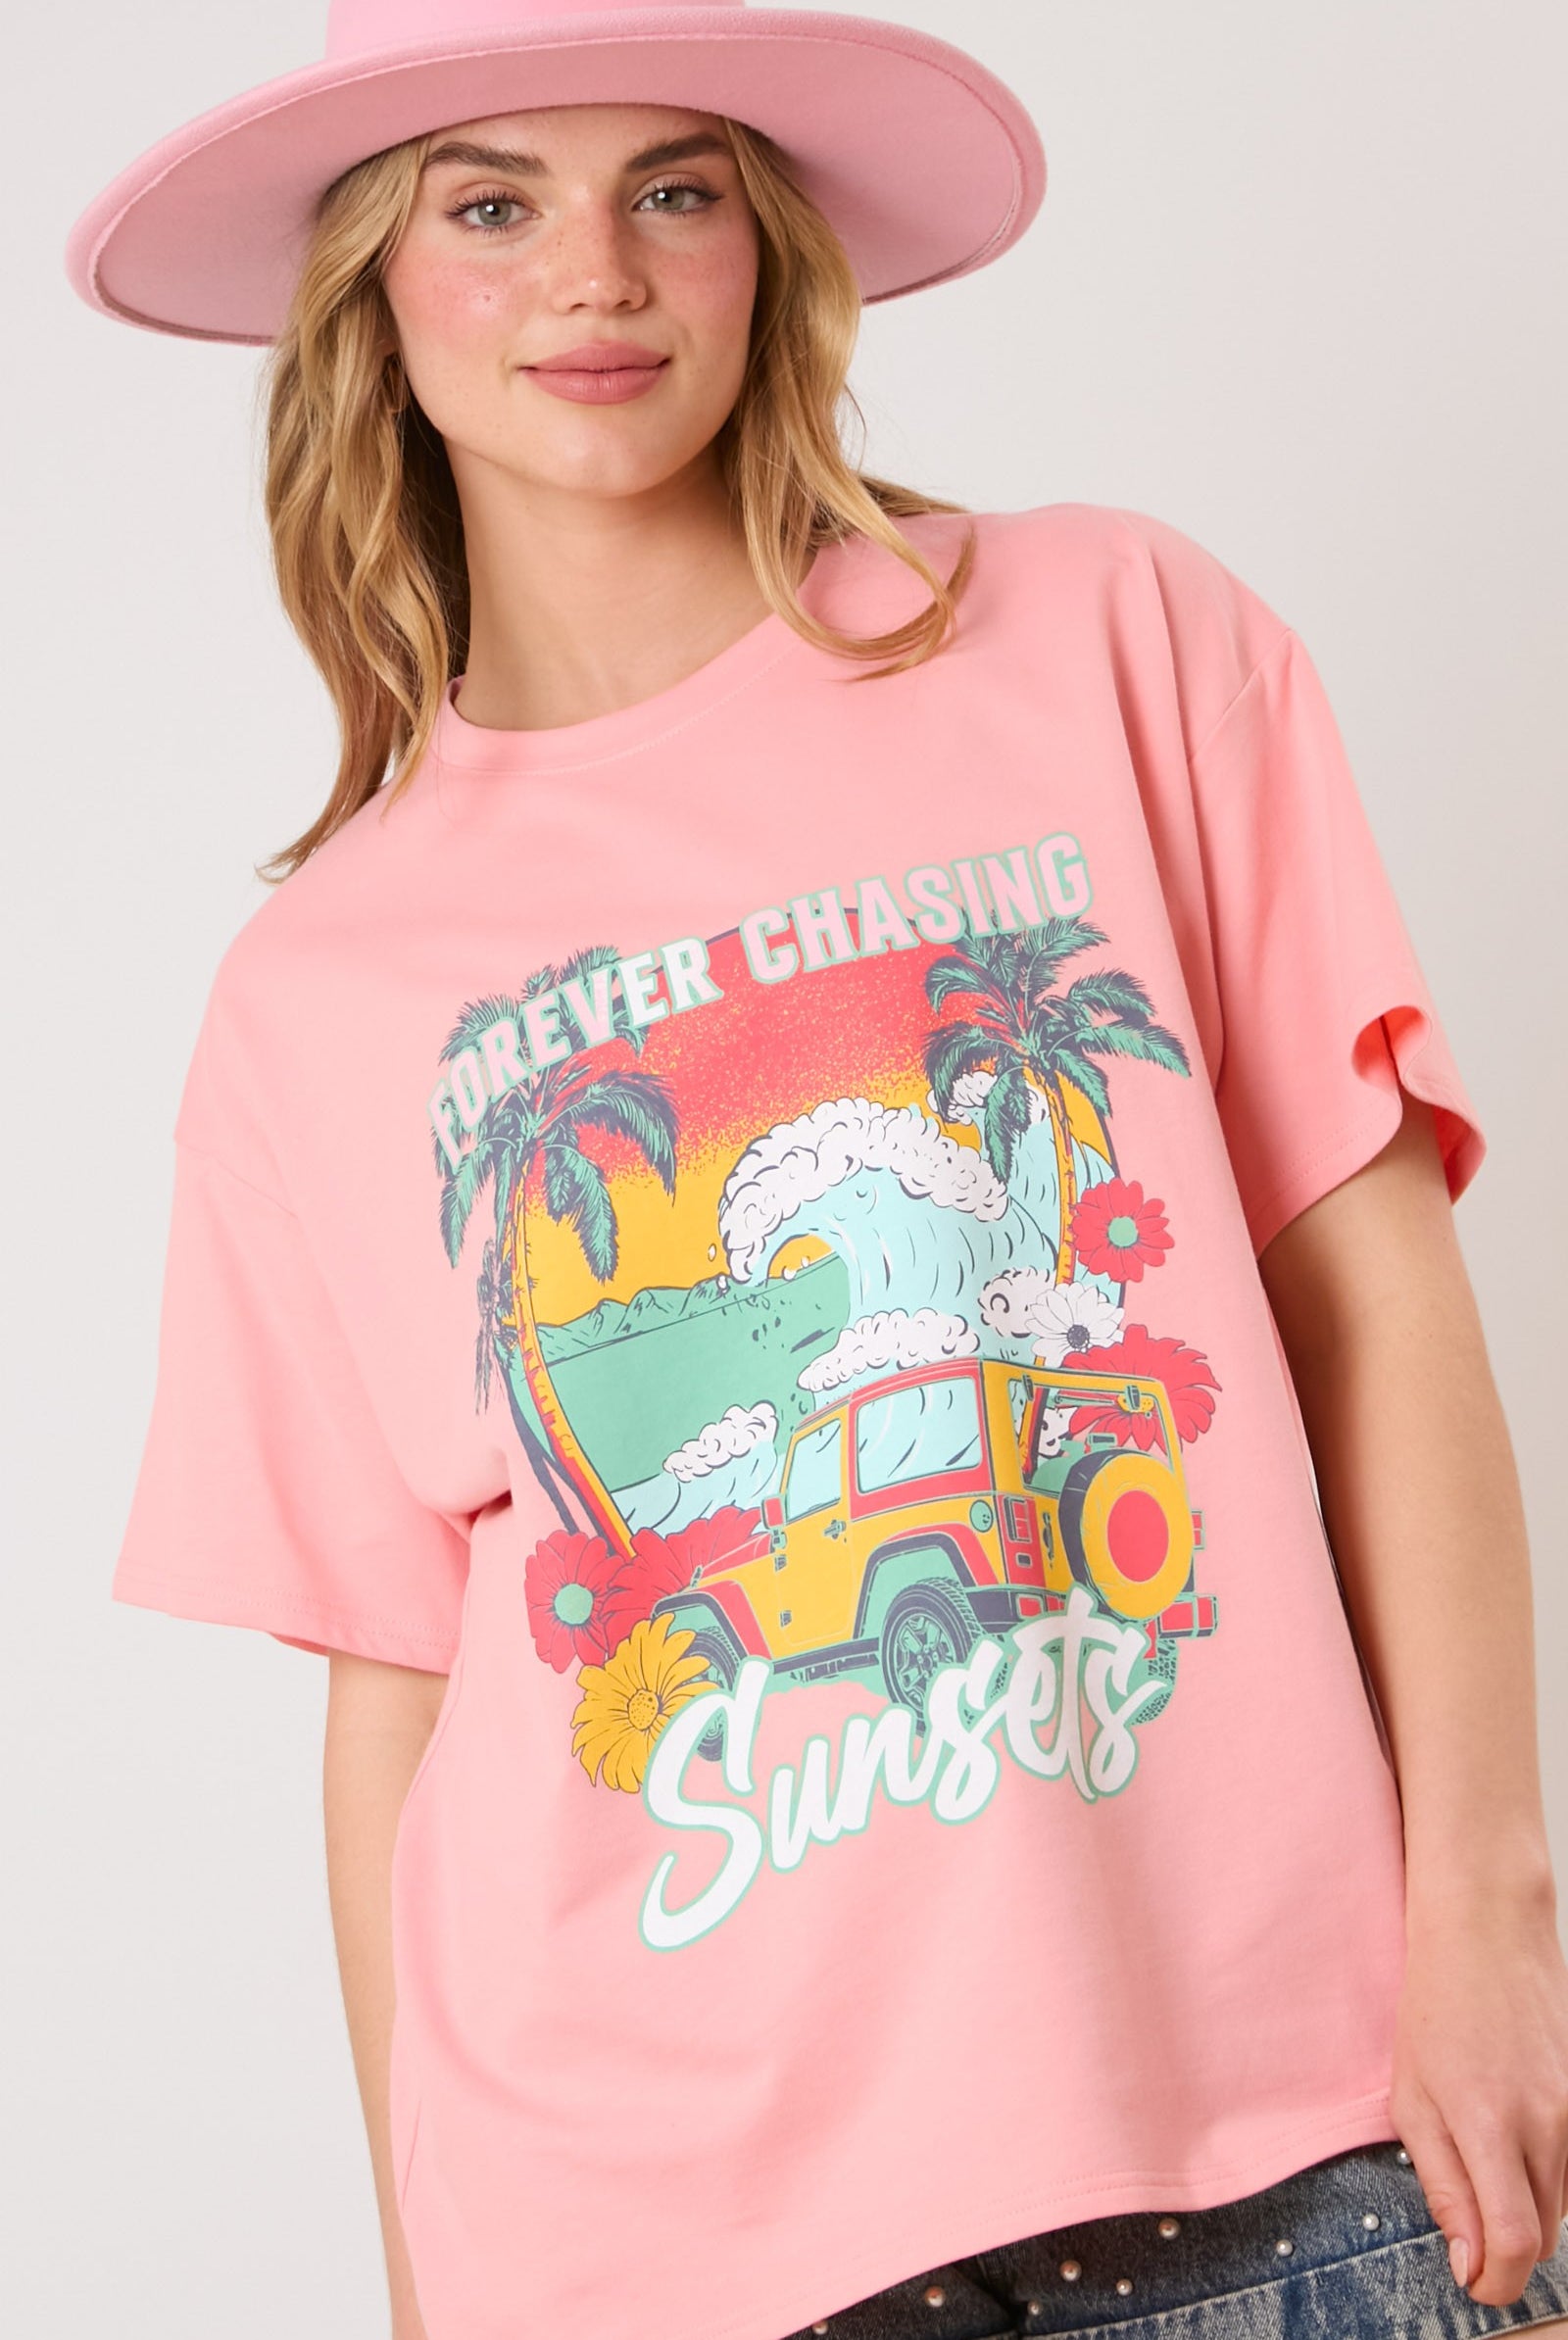 Forever Chasing Sunsets Short Sleeve Rhinestone Detail Graphic Tee Top - Be You Boutique